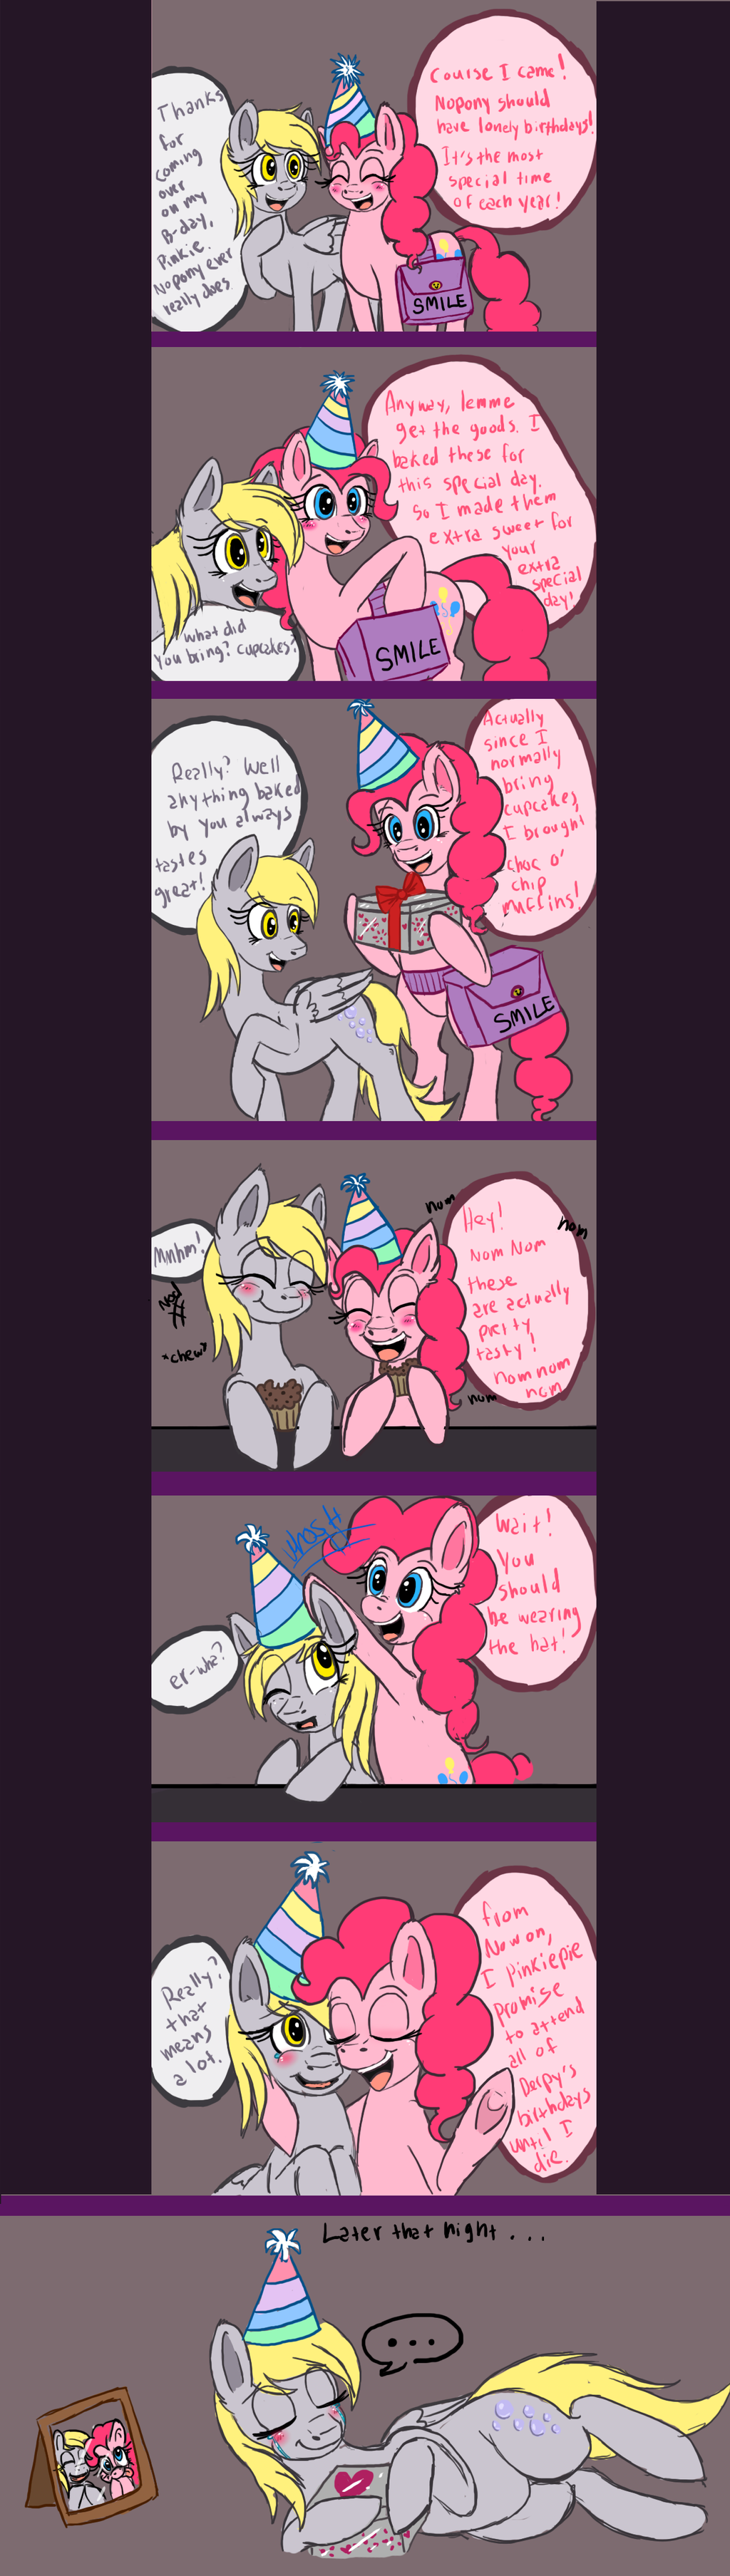 Why Derpy likes Muffins.